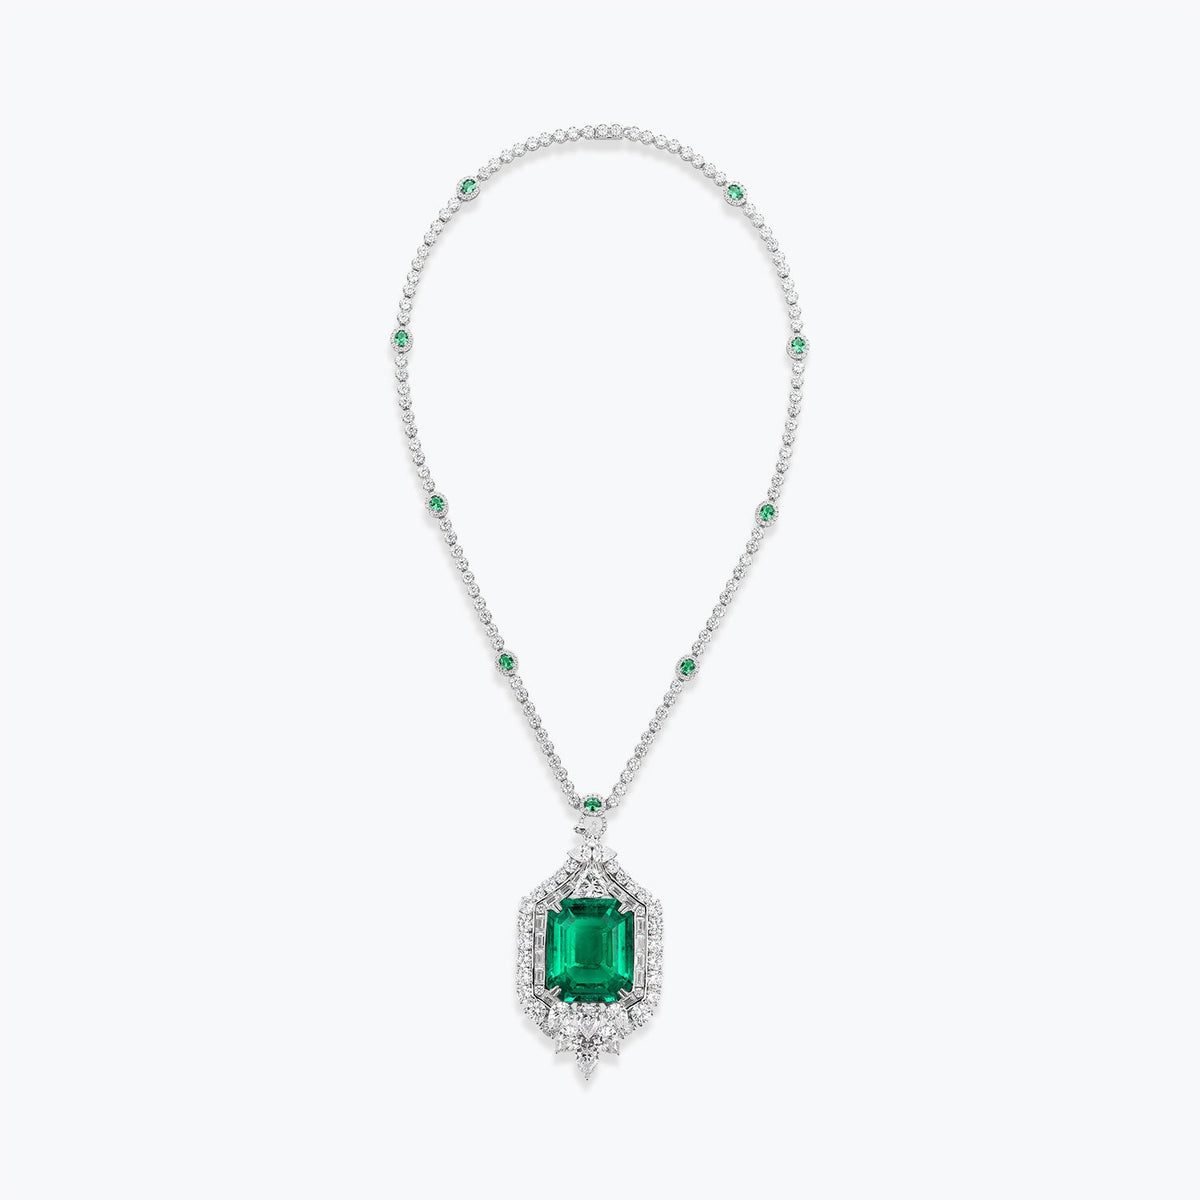 Dissoo® Emerald Necklace&Pendant 74.6 Ct. Sterling Silver with Petal Ornament - dissoojewelry